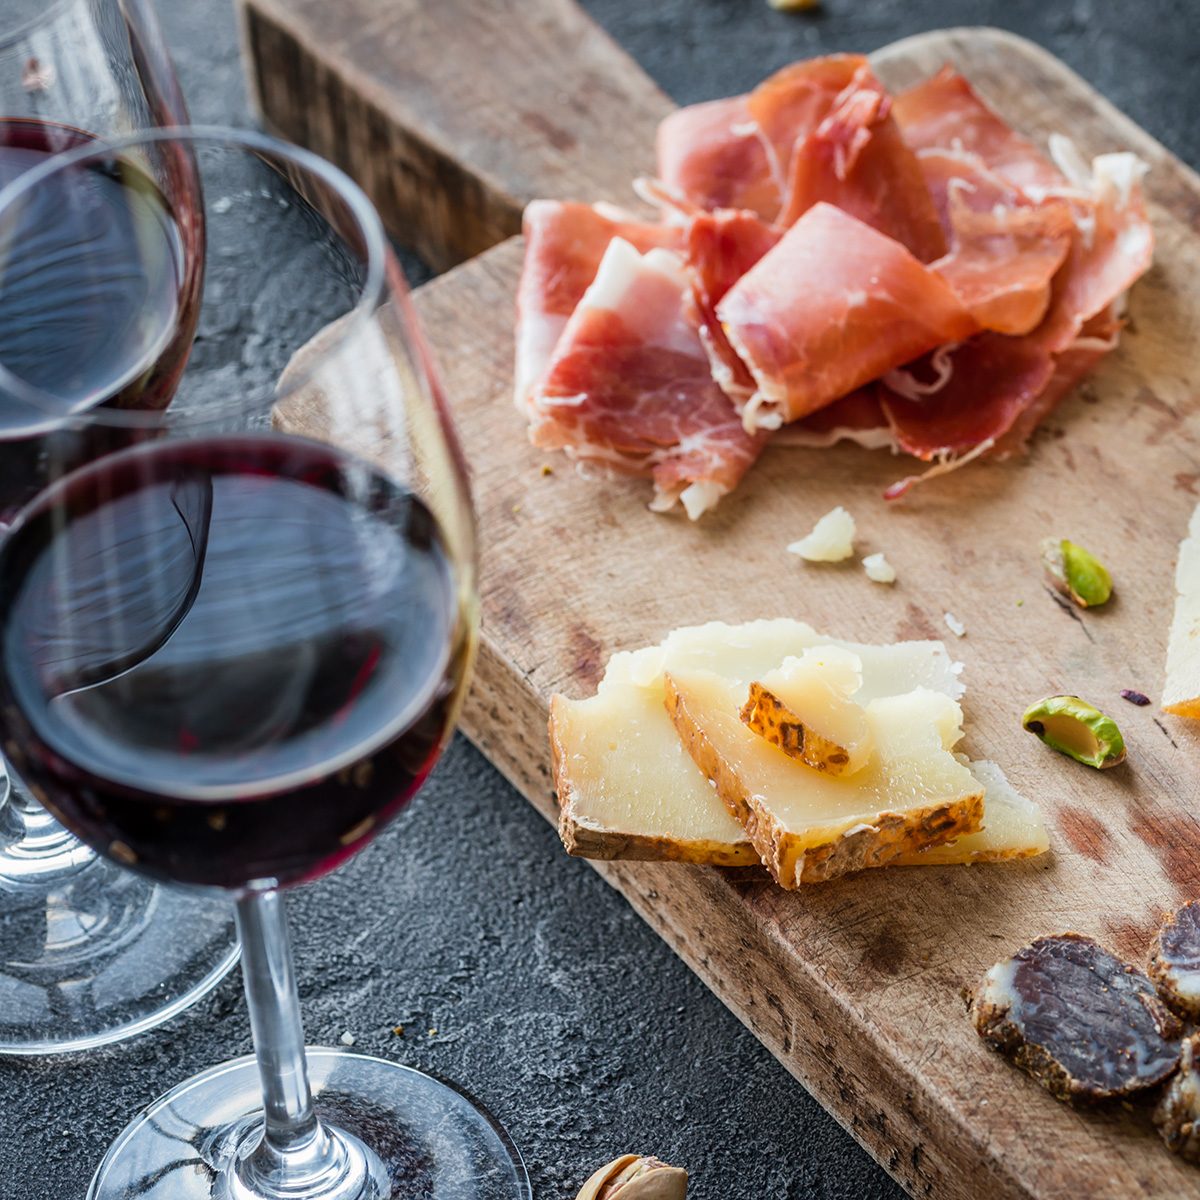 15 Easy Food And Wine Pairings For Your Next Party